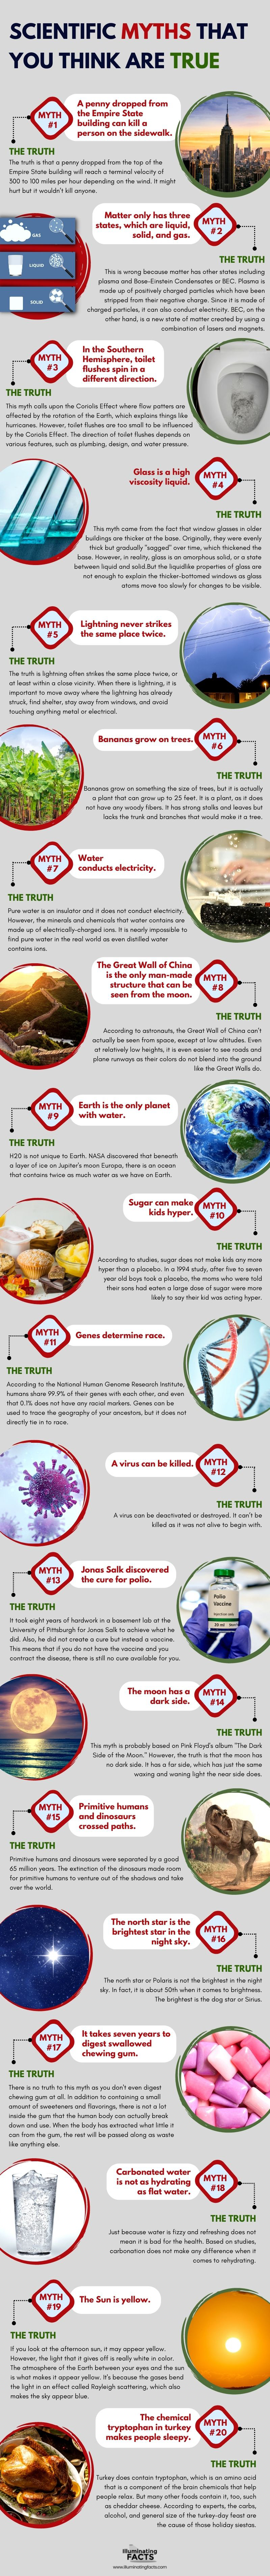 SCIENTIFIC MYTHS THAT YOU THINK ARE TRUE